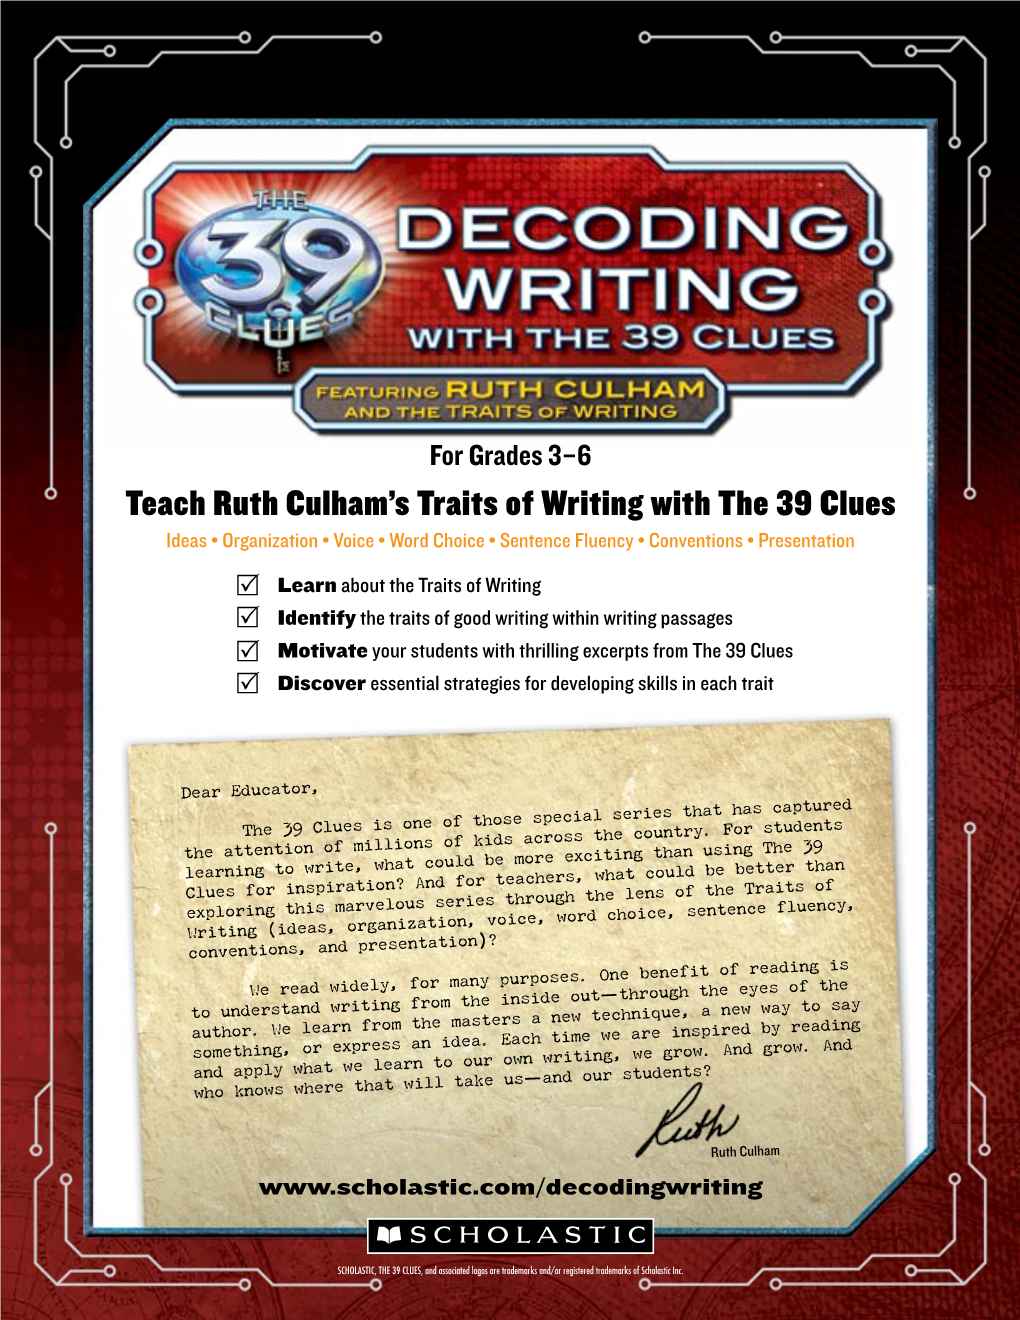 Teach Ruth Culham's Traits of Writing with the 39 Clues